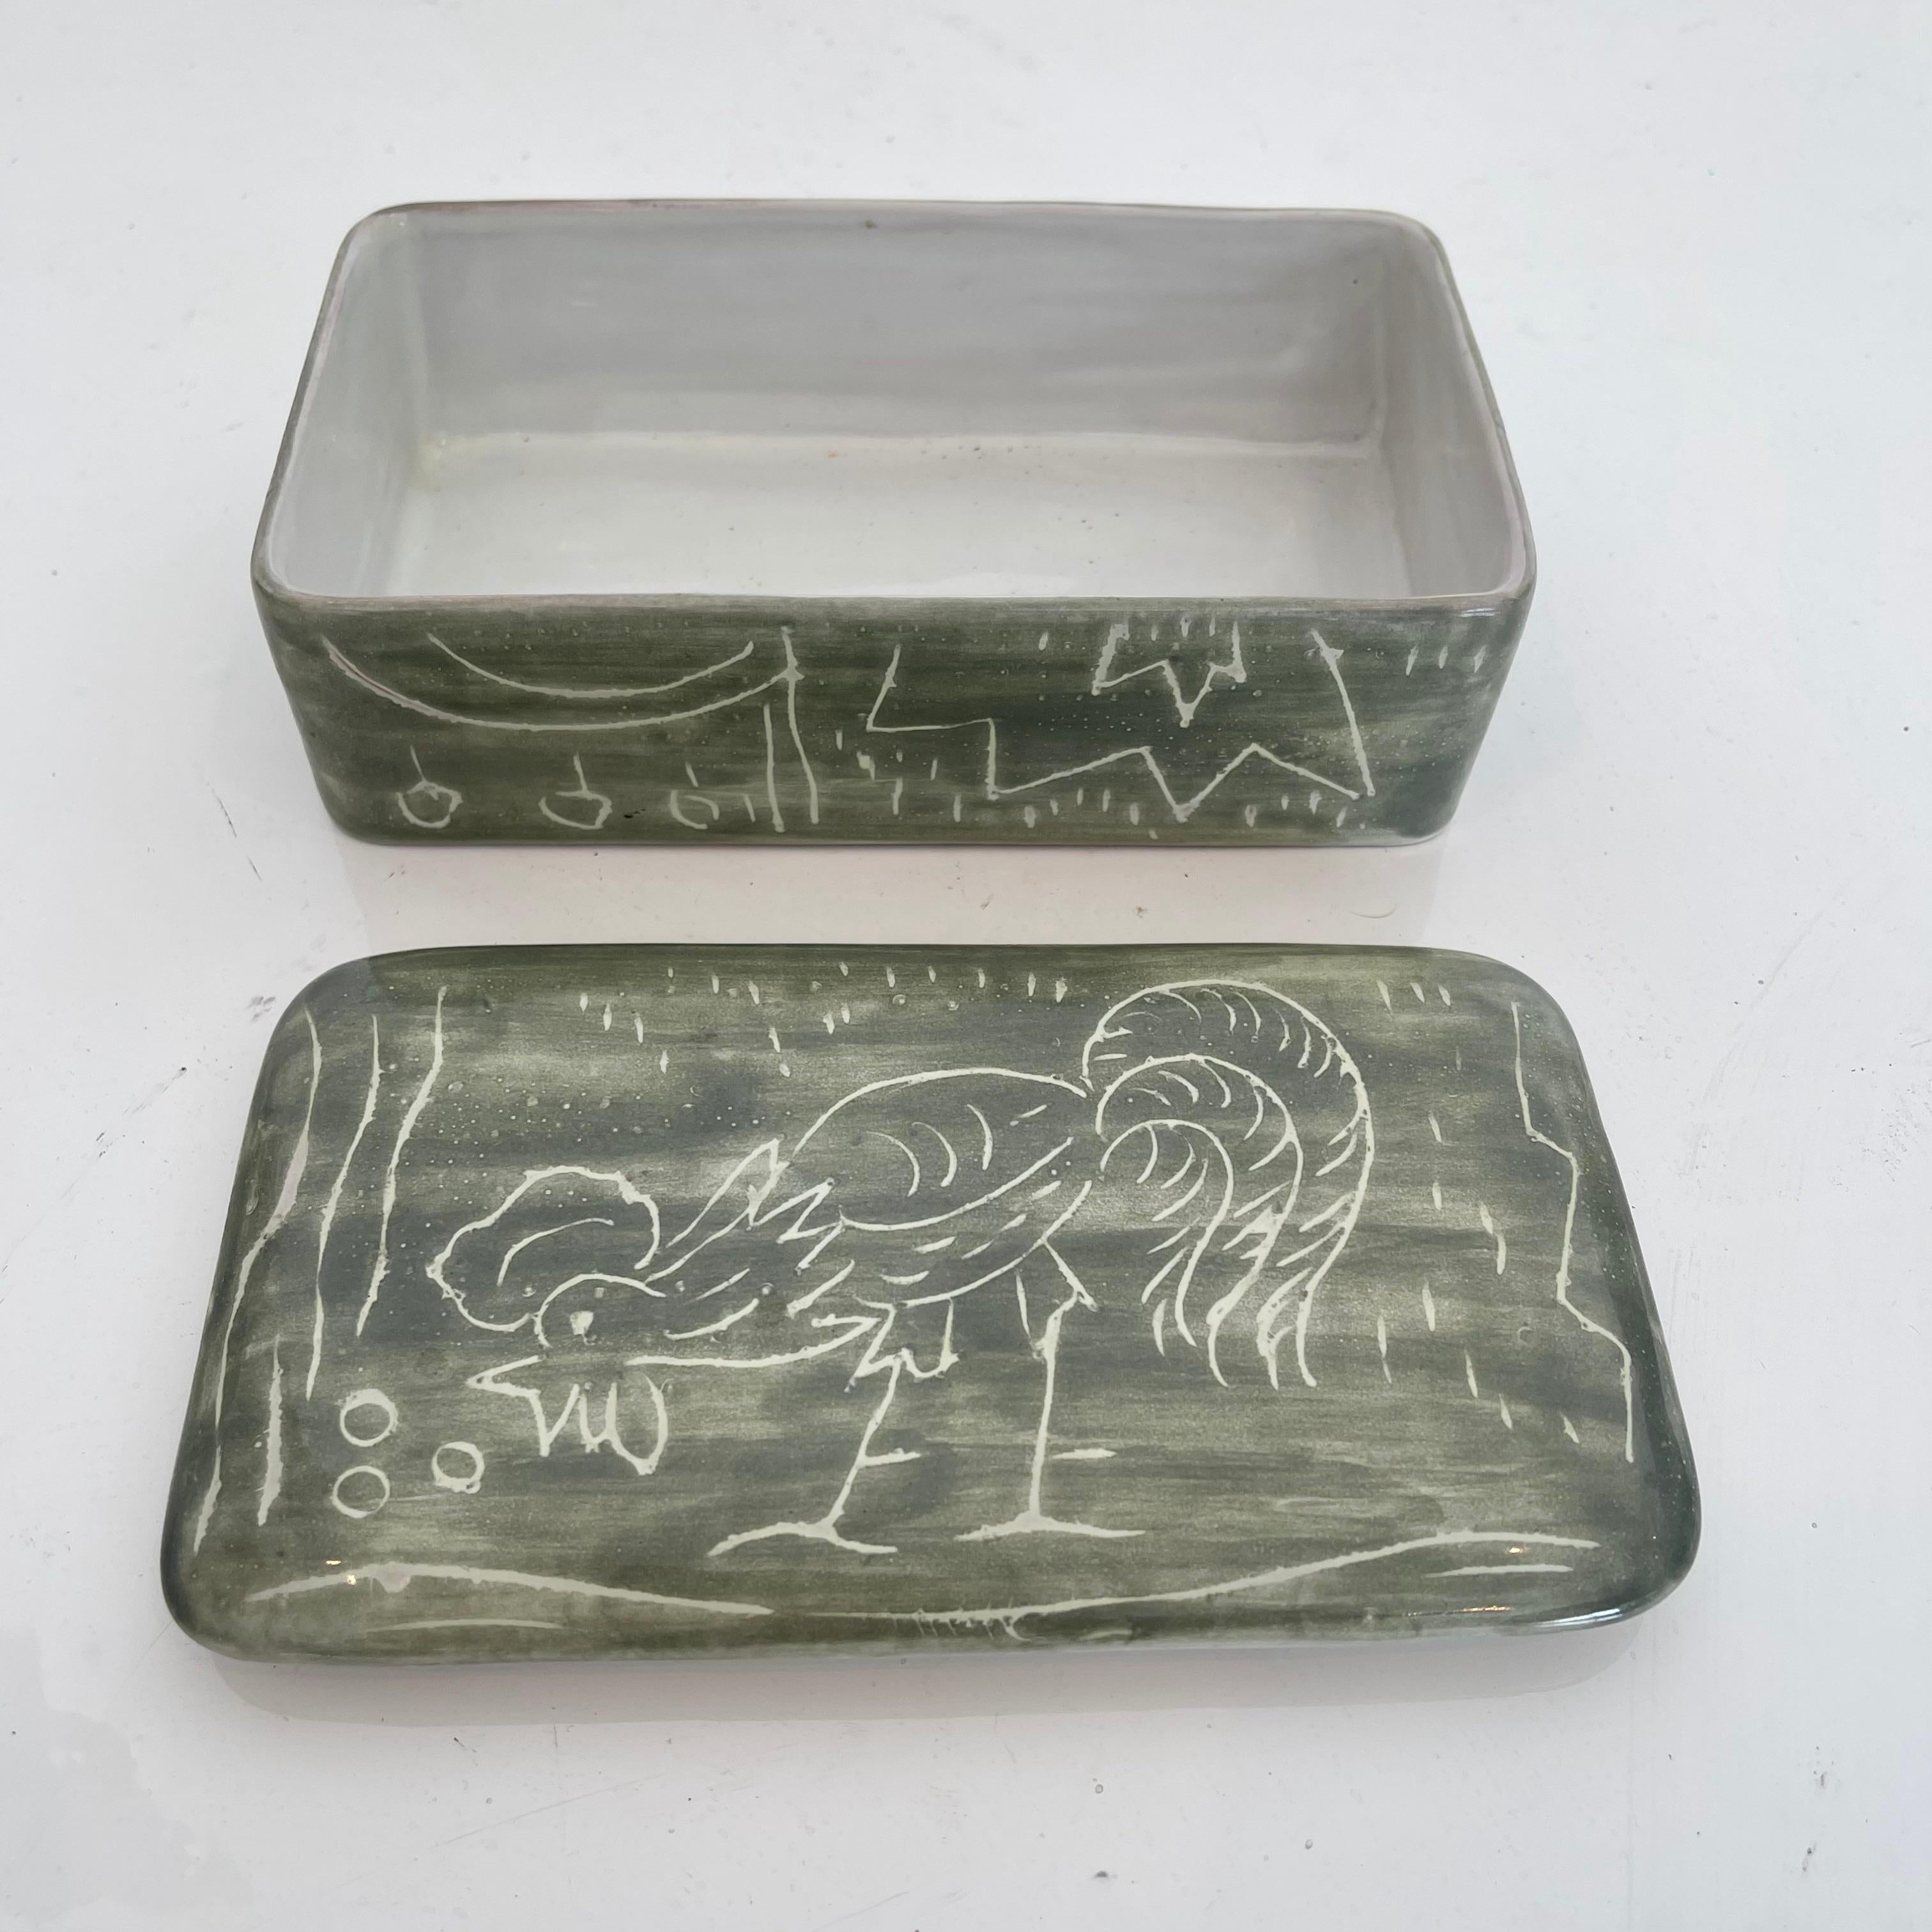 Green ceramic box made in Italy. Drawing of a rooster etched into the box. Great small piece of art. Perfect stash box and tabletop object. Marked Arlero, Italy on underside.